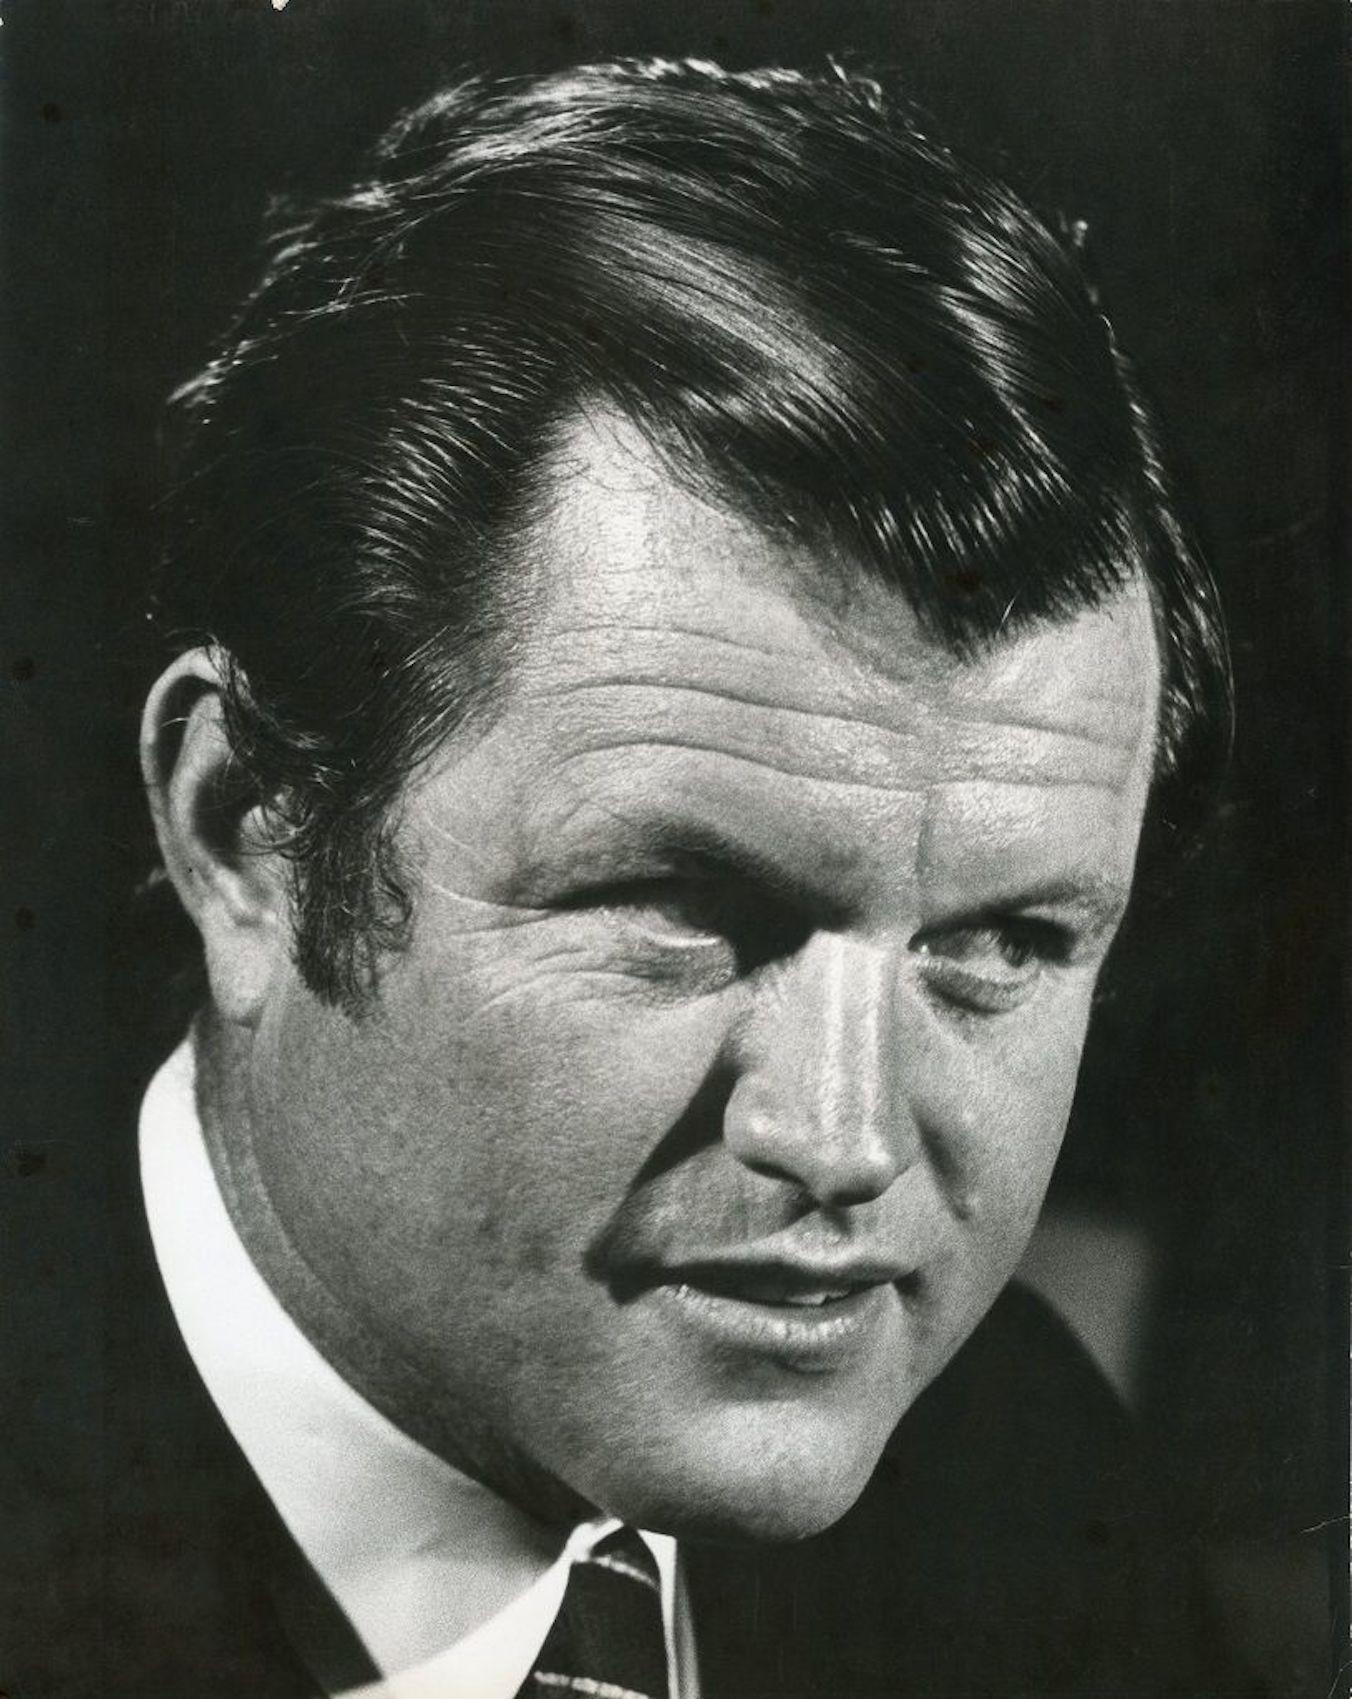 Portrait of Ted Kennedy - Press Photo by Ron Galella - 1960s